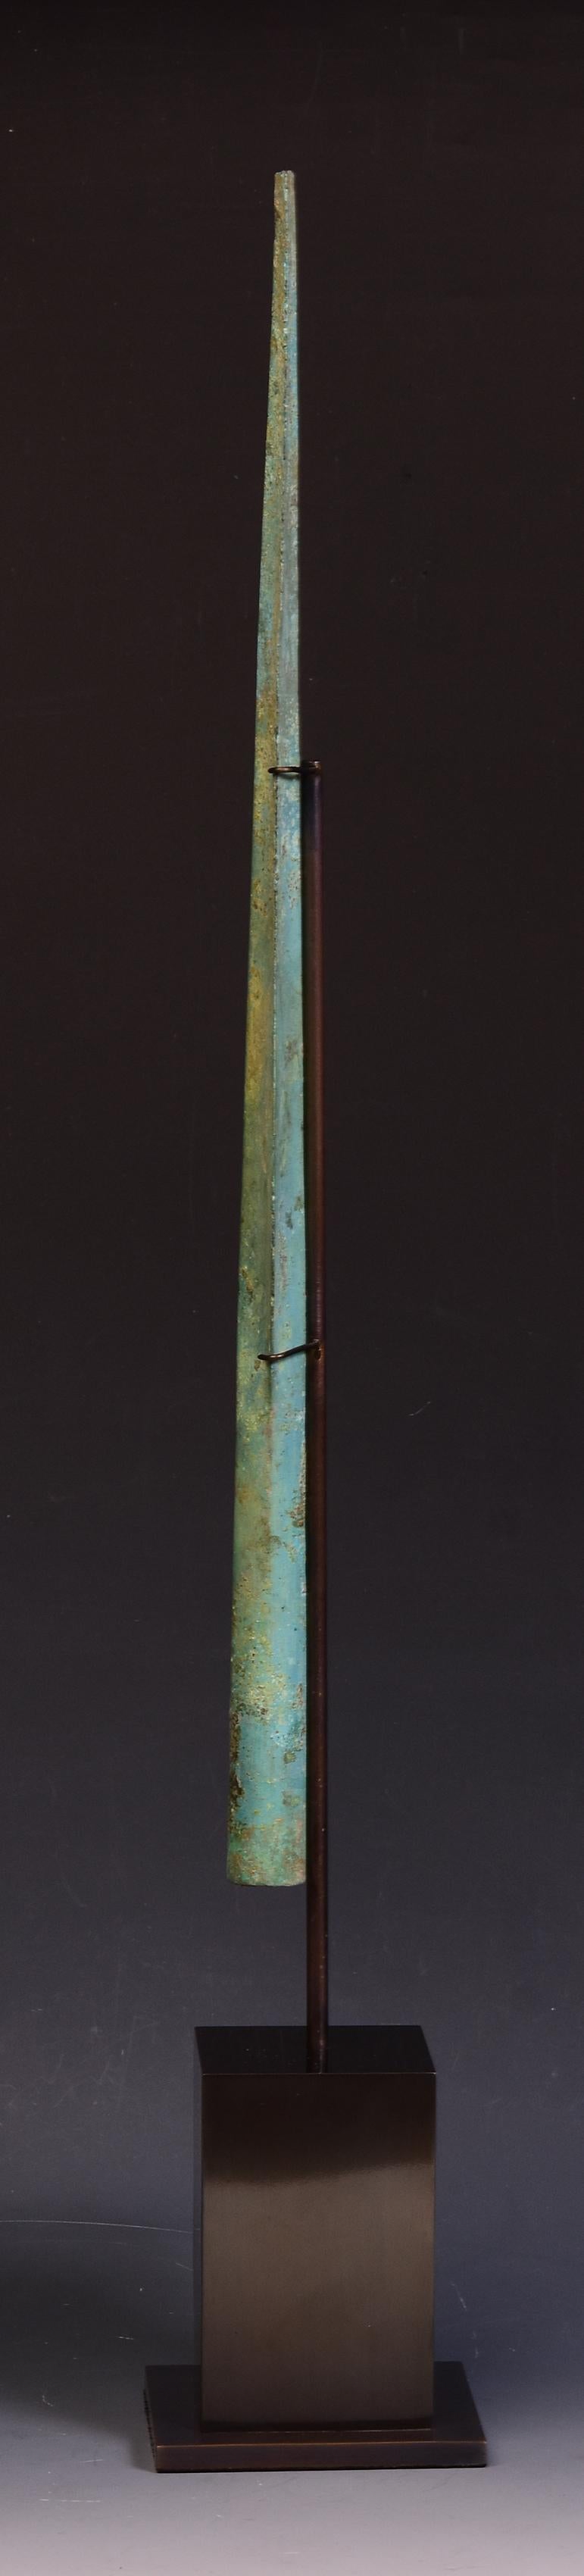 Ancient Antique Luristan Bronze Spear Early Iron Age Weapon For Sale 3